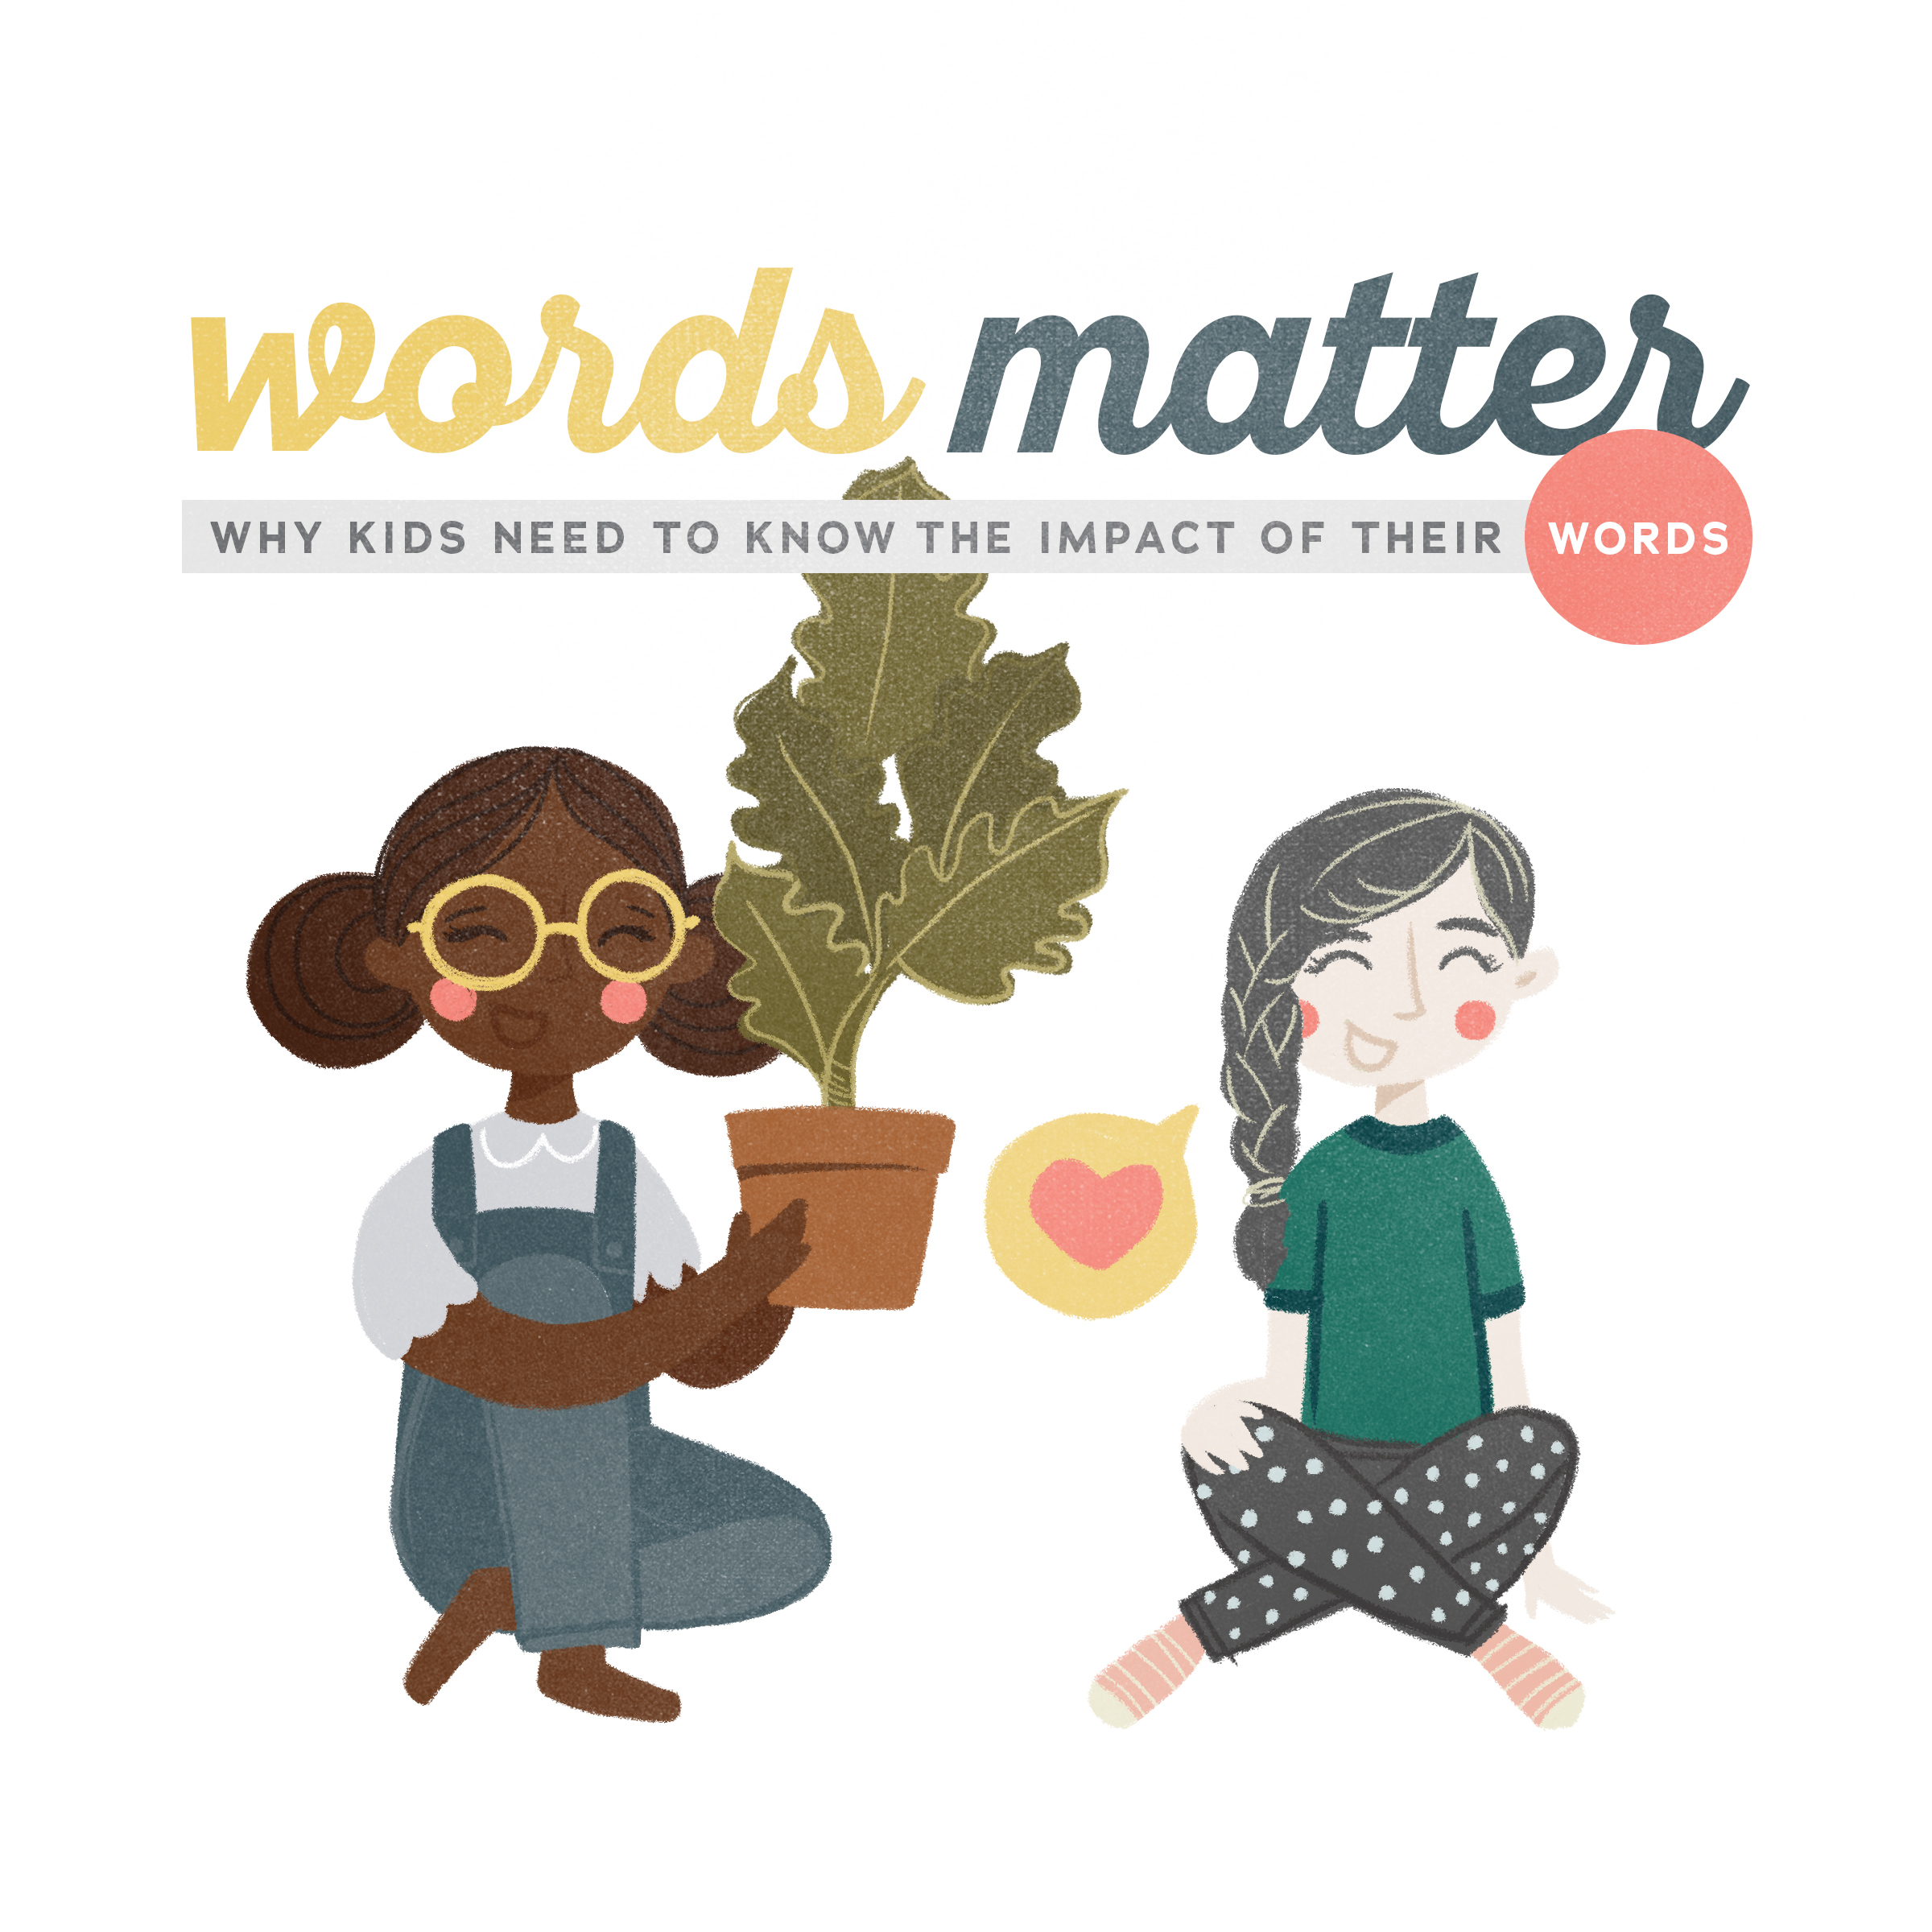 Your Words Matter: Why kids need to know the impact of their words